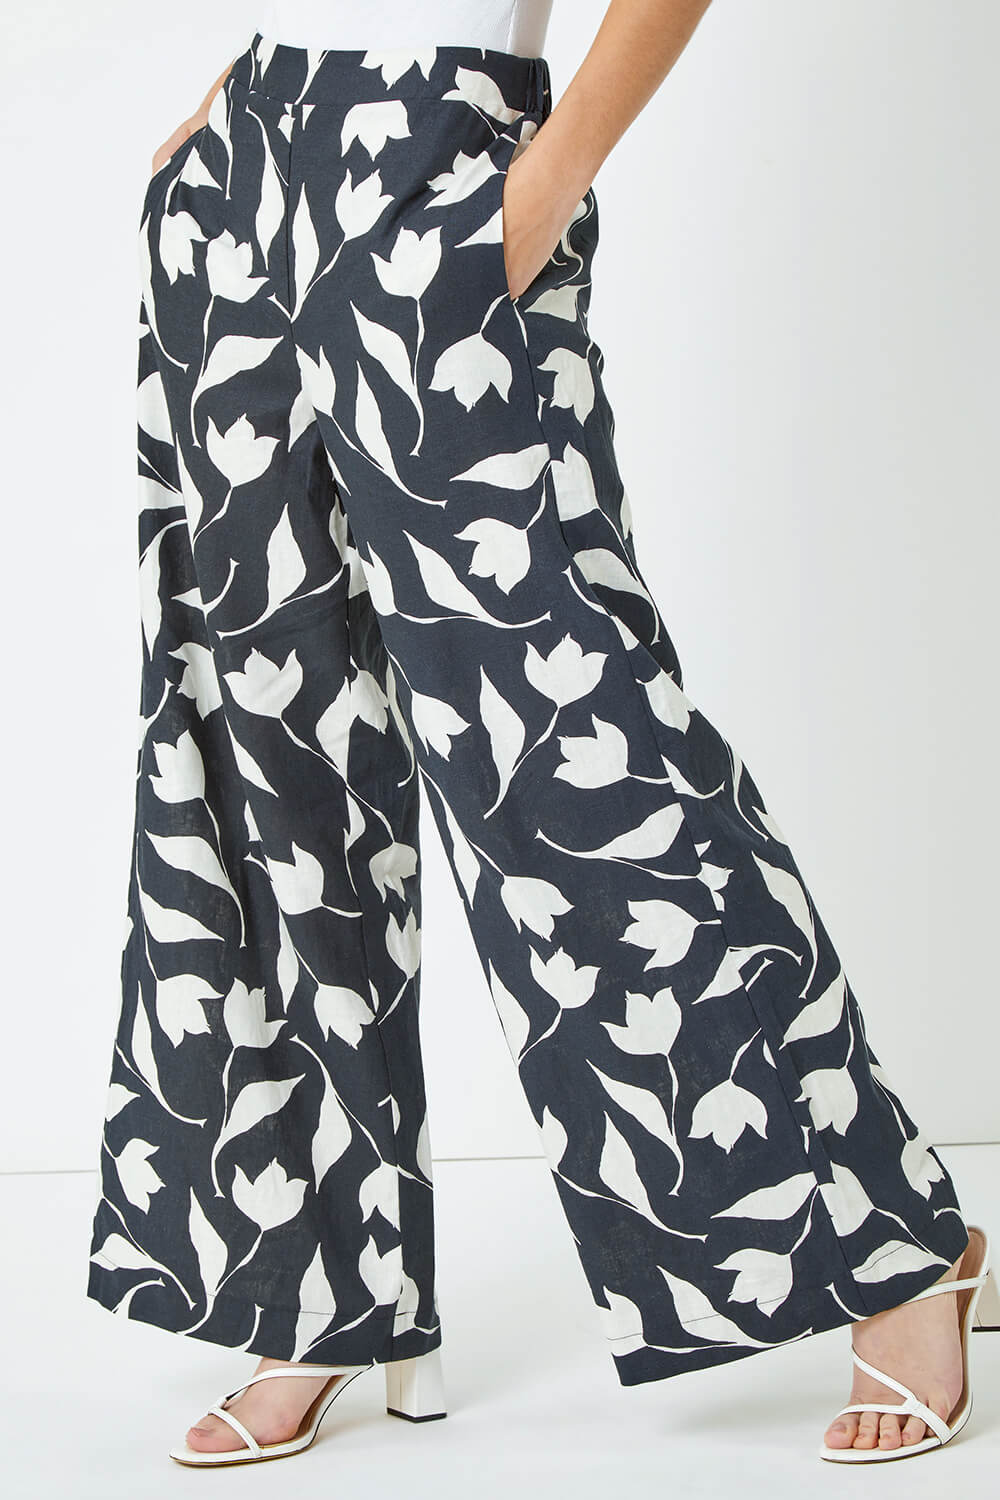 Black Floral Print Wide Leg Trousers, Image 5 of 5